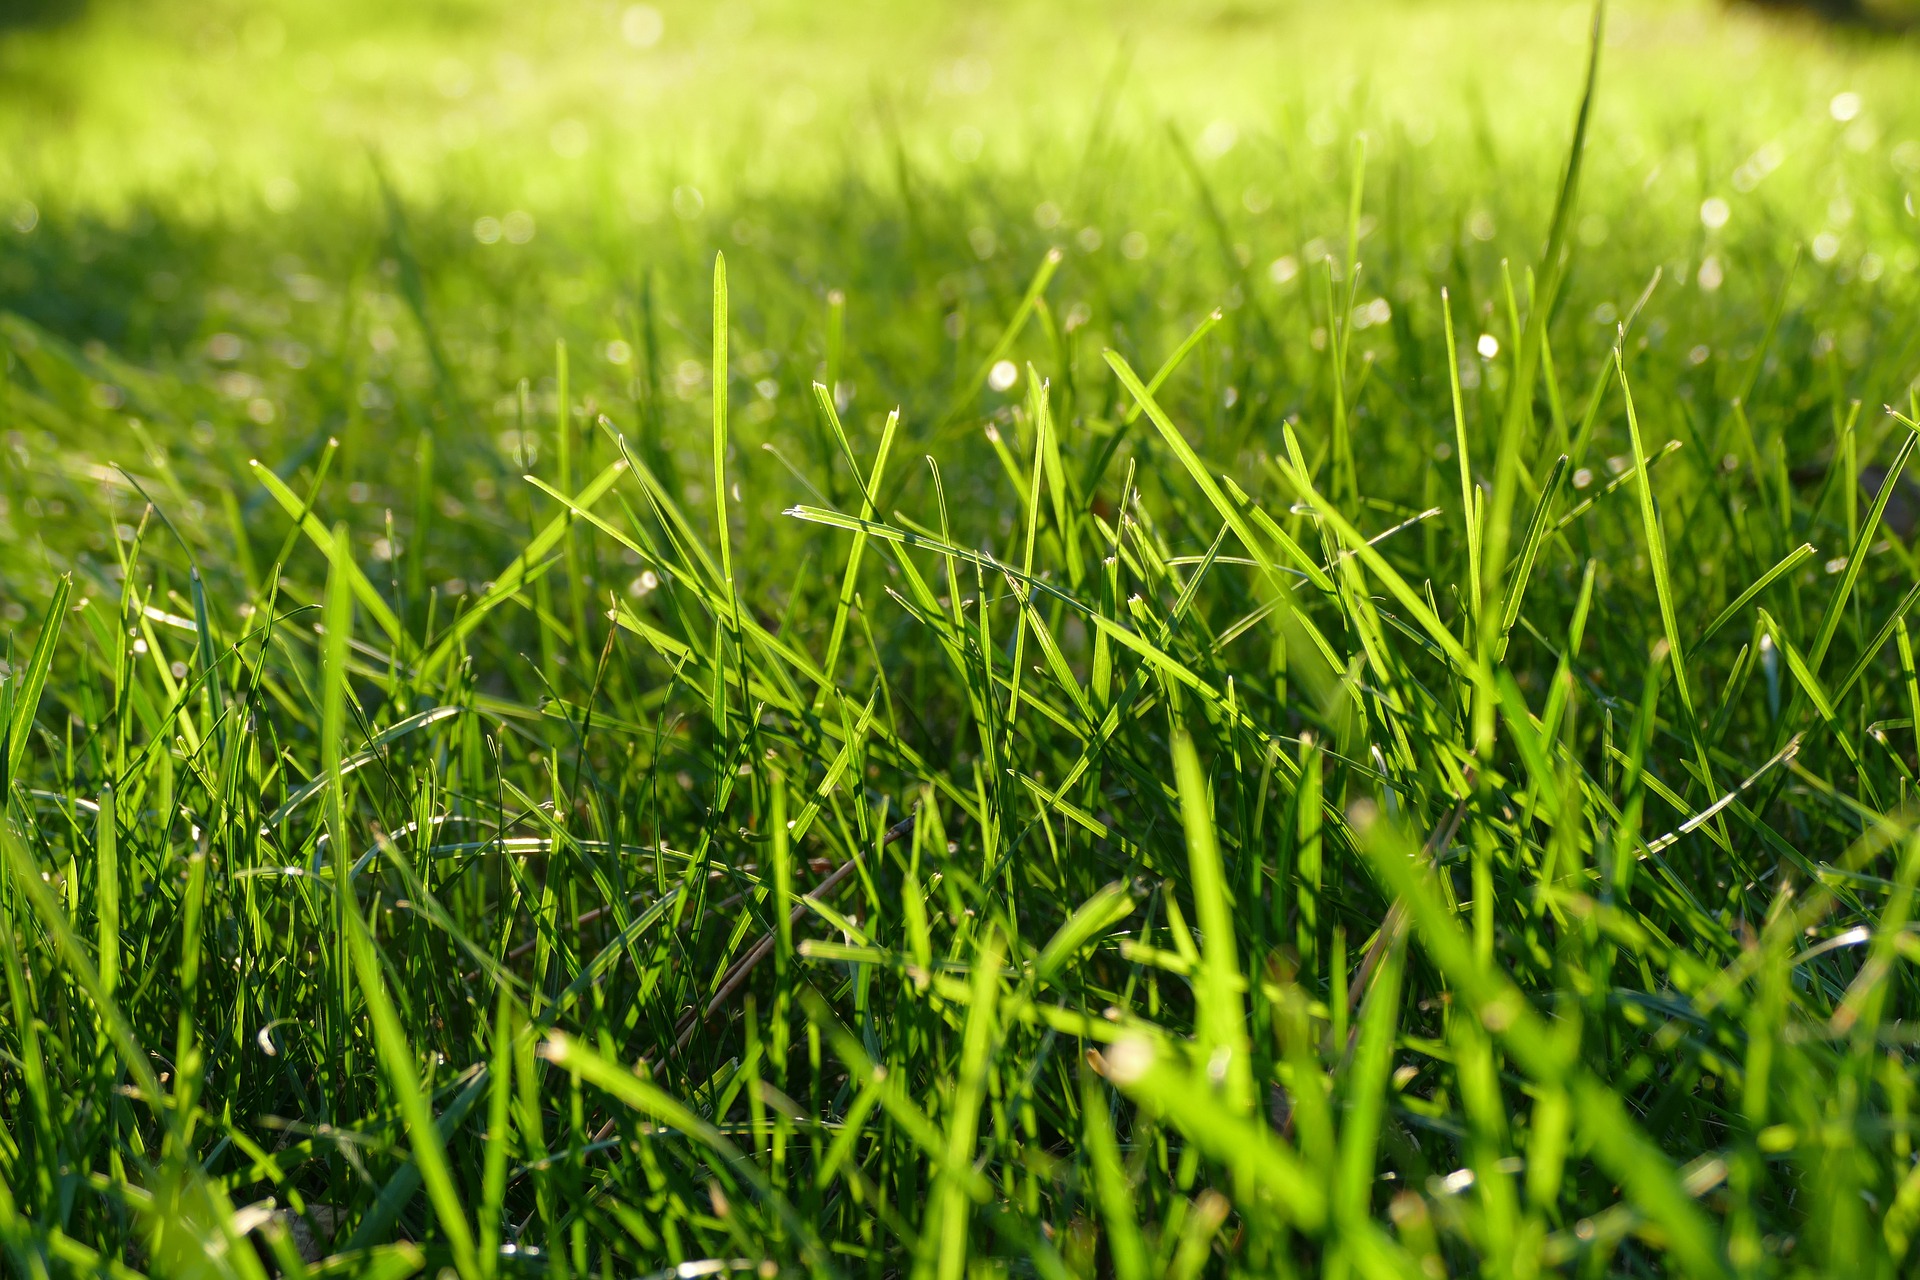 Burning your Grass: Good or Bad? | Perfectly Green Lawn Care